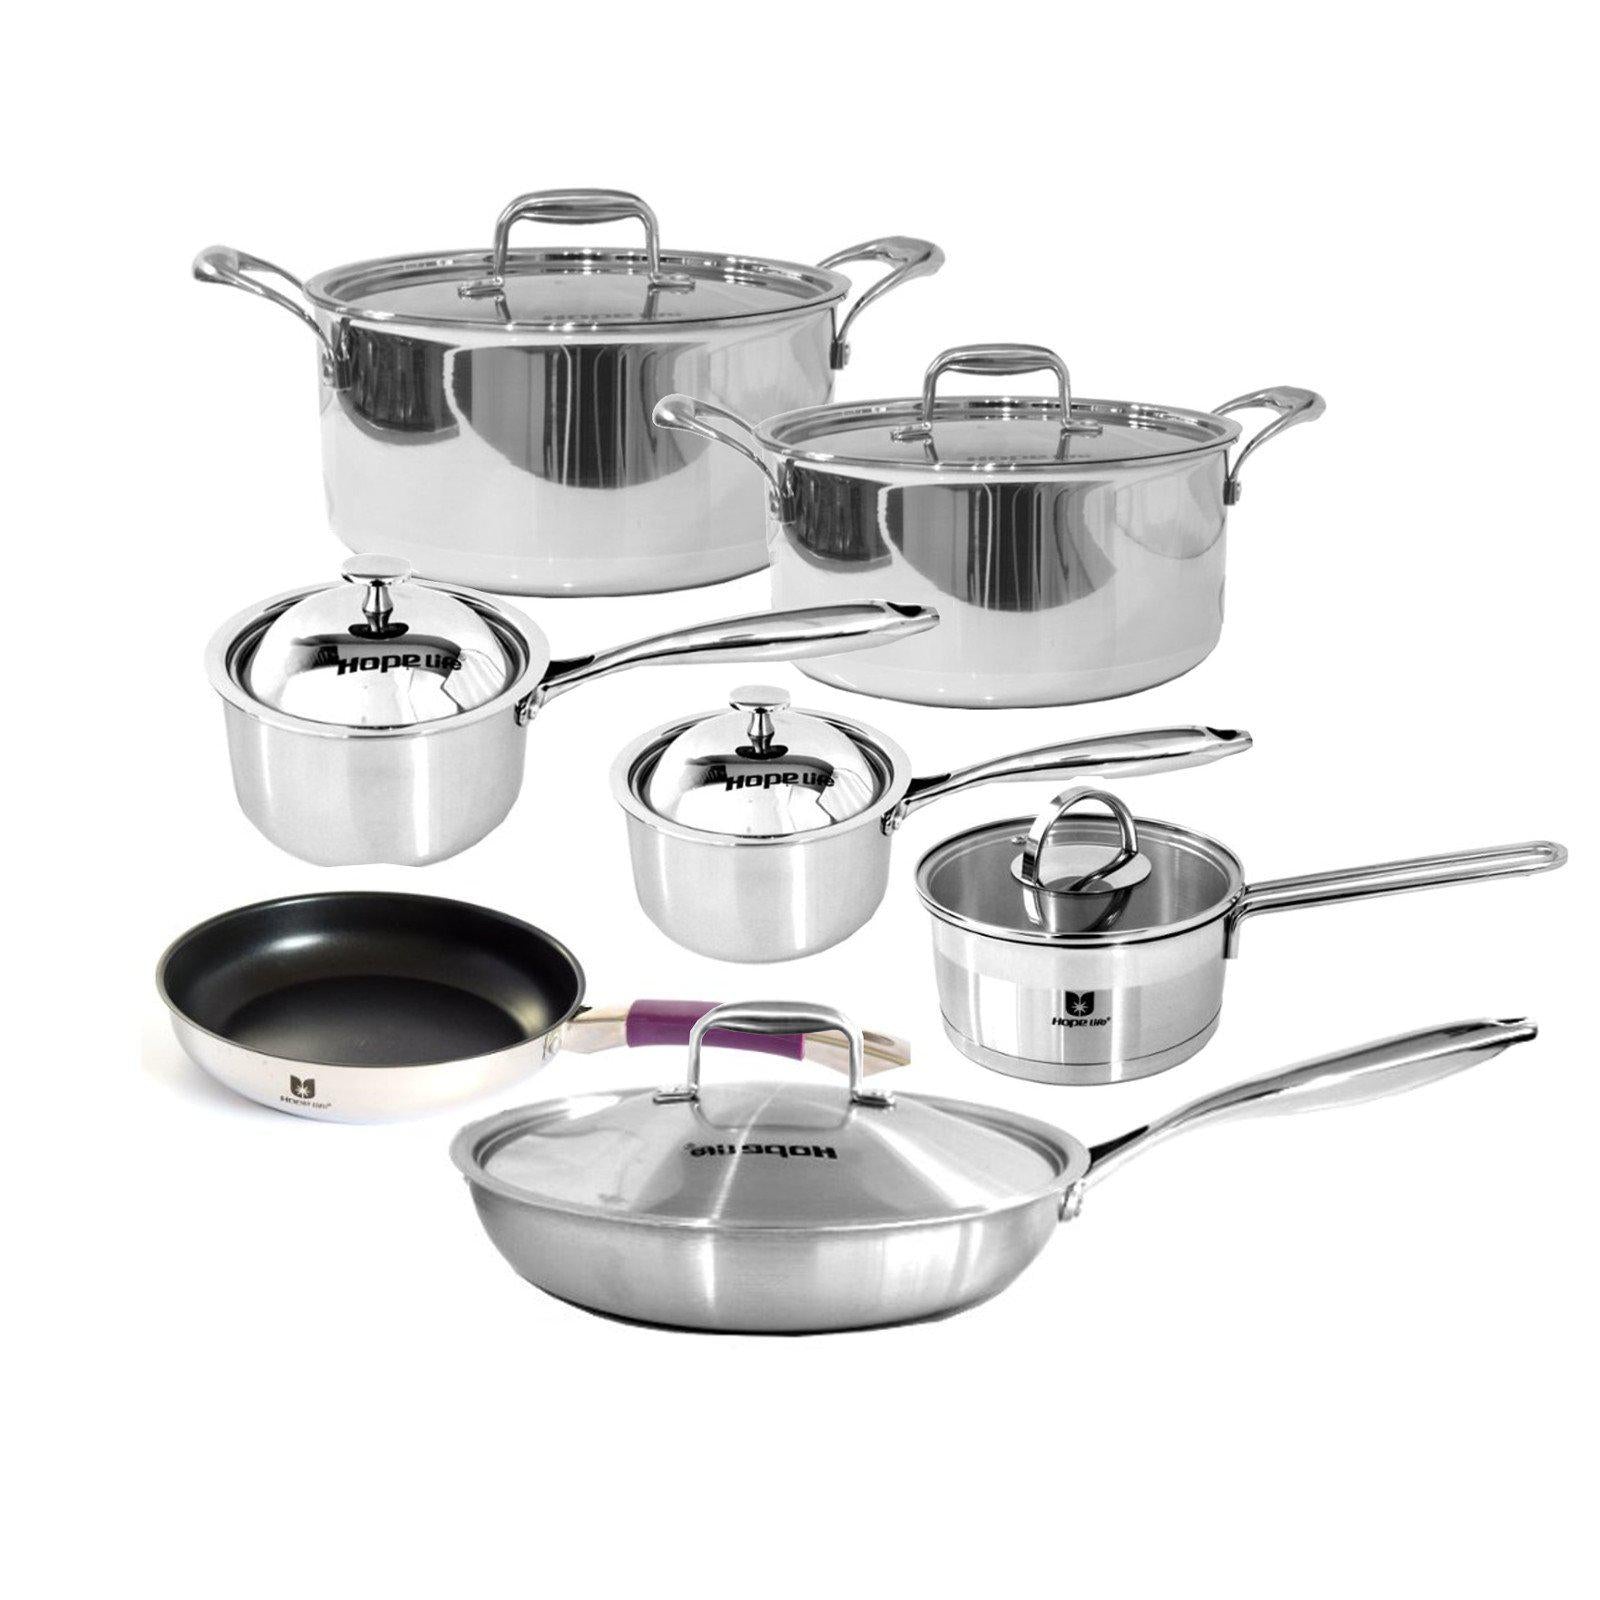 Induction Cookware Set - Stainless Steel Saucepans, Frying Pans & Casseroles-Stainless Steel Cookware Set-Chef's Quality Cookware